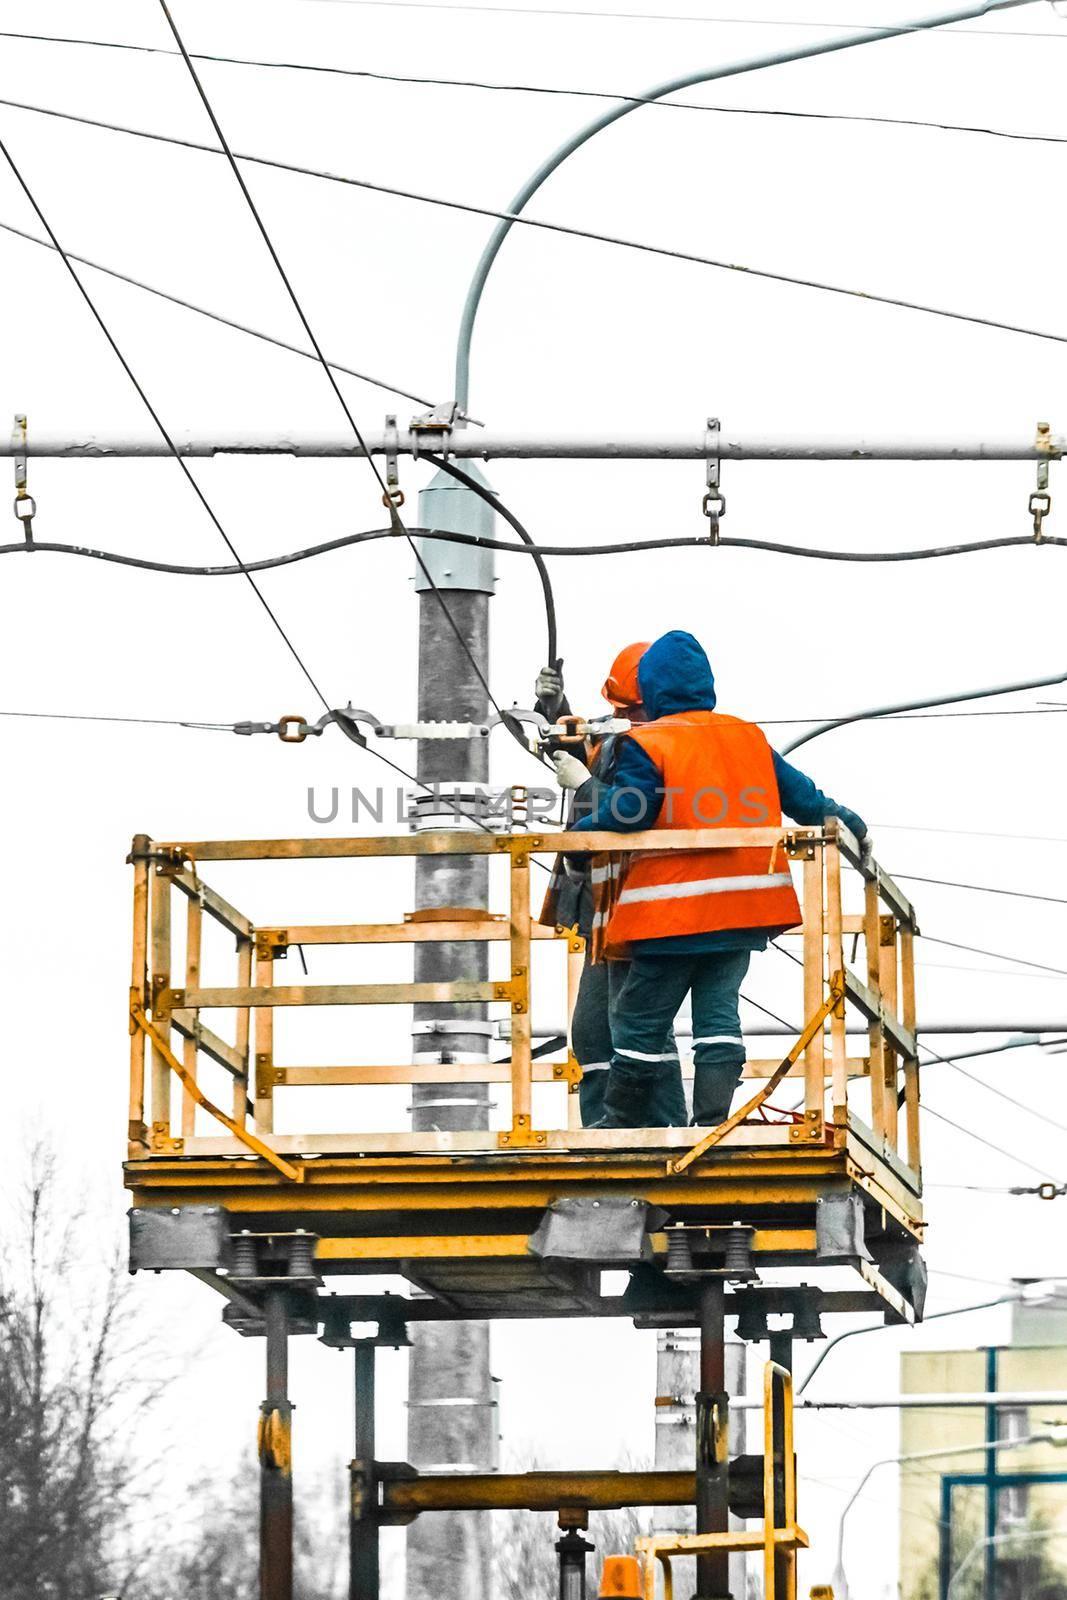 Two working men raised safety on a machine crane equipment mending a power electric line.